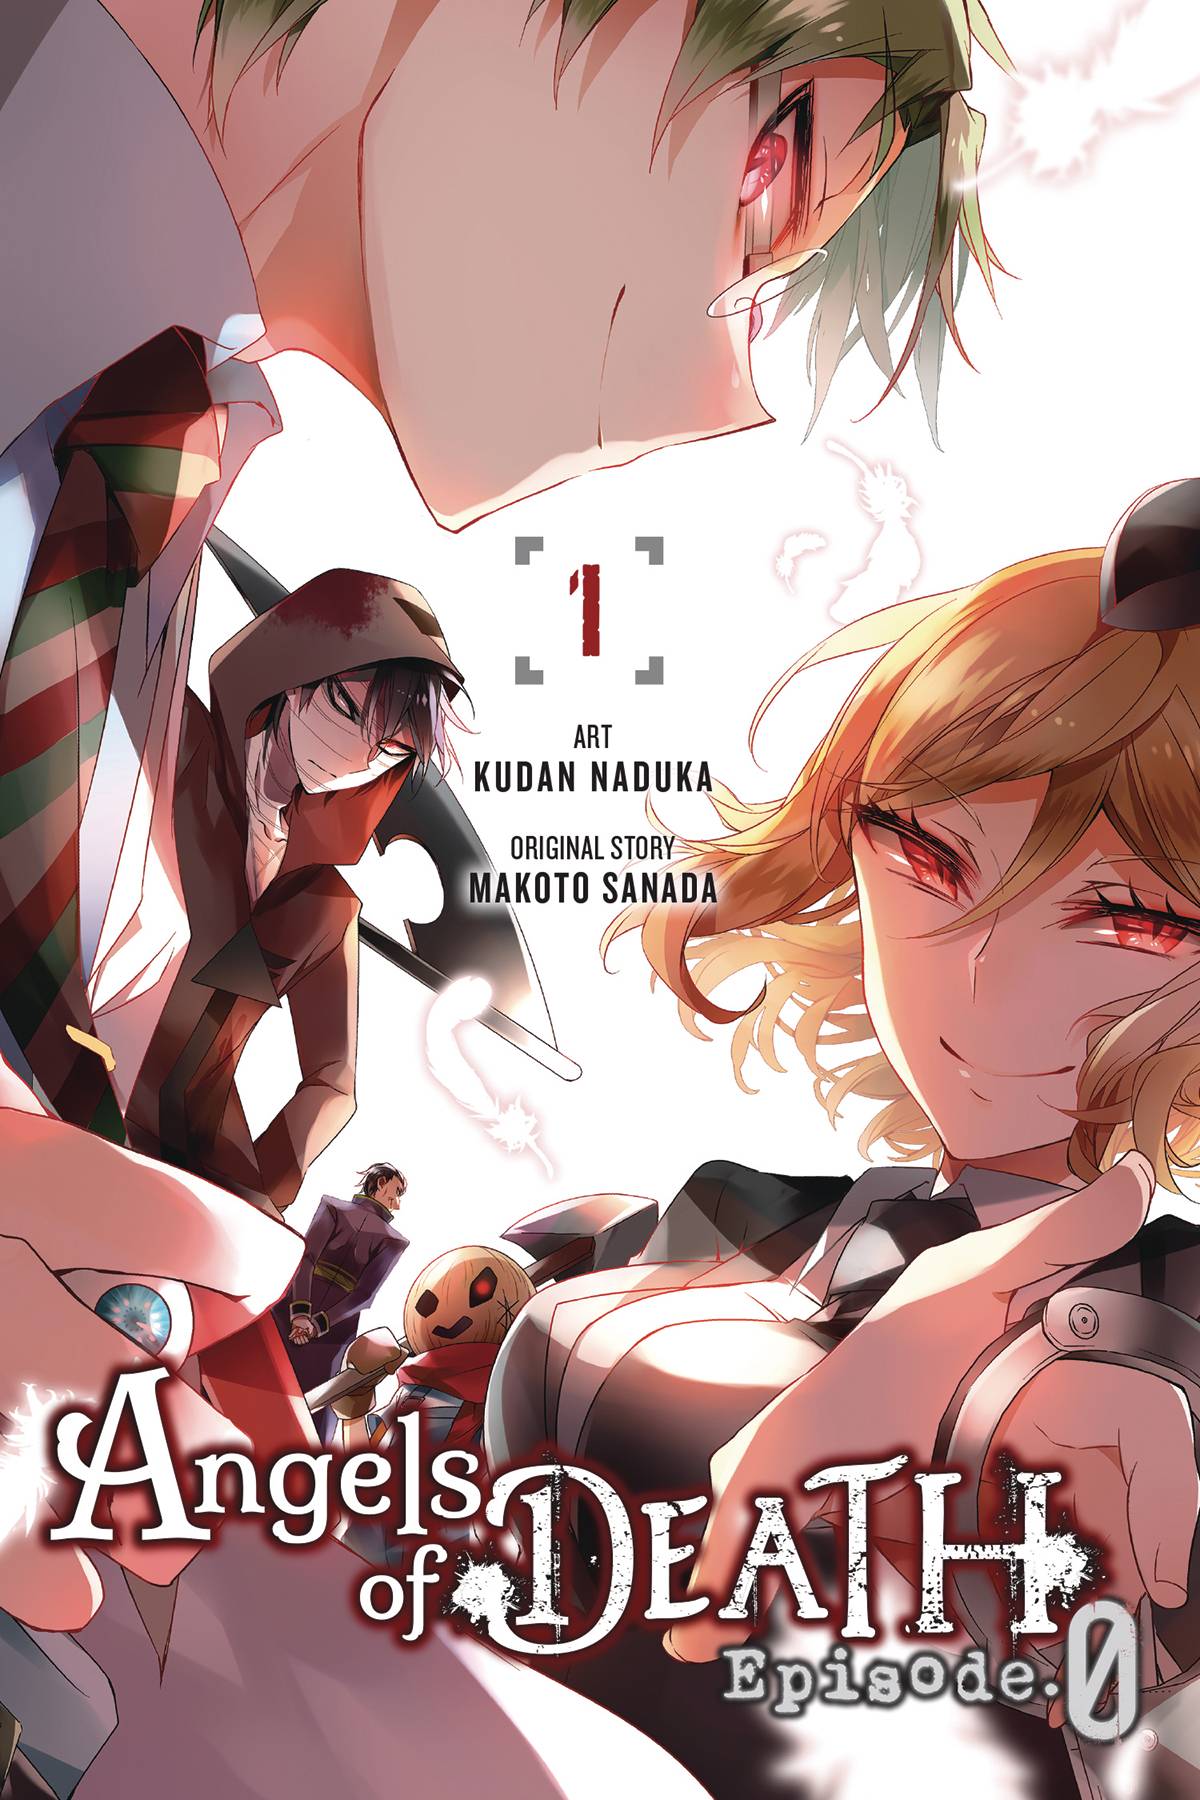 SEP172106 - ANGELS OF DEATH GN VOL 01 - Previews World